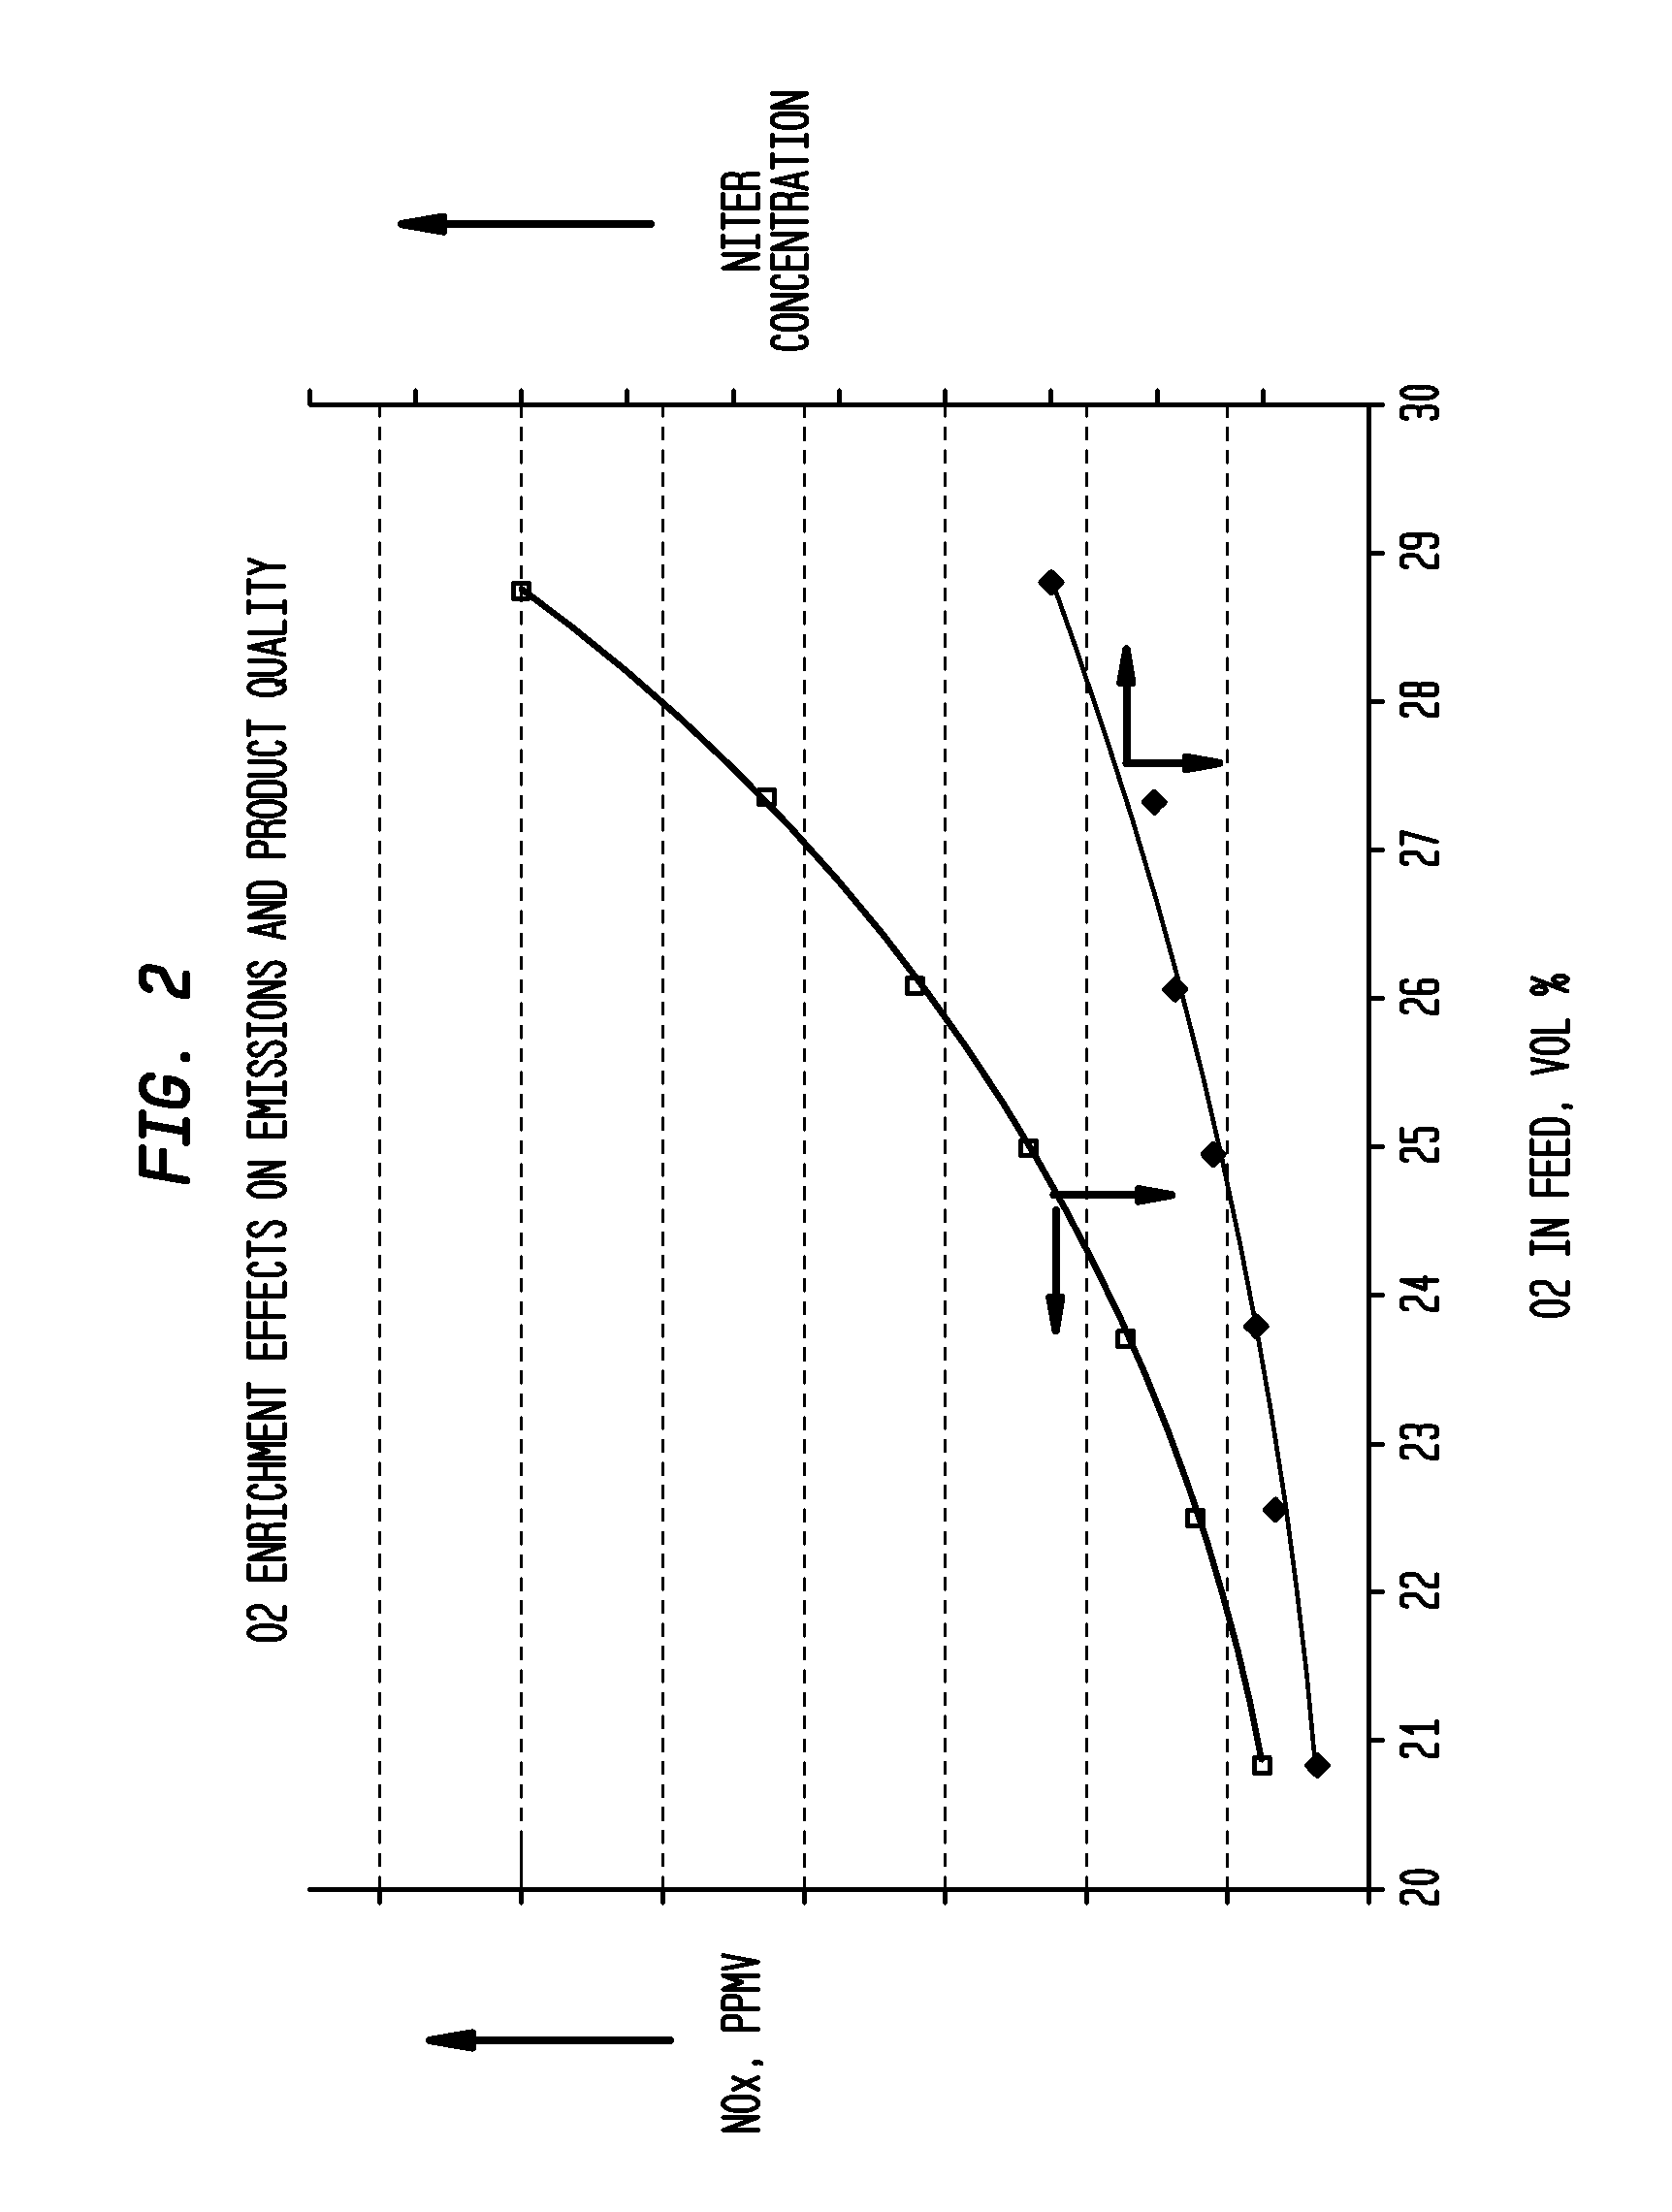 Process for removing contaminants from gas streams